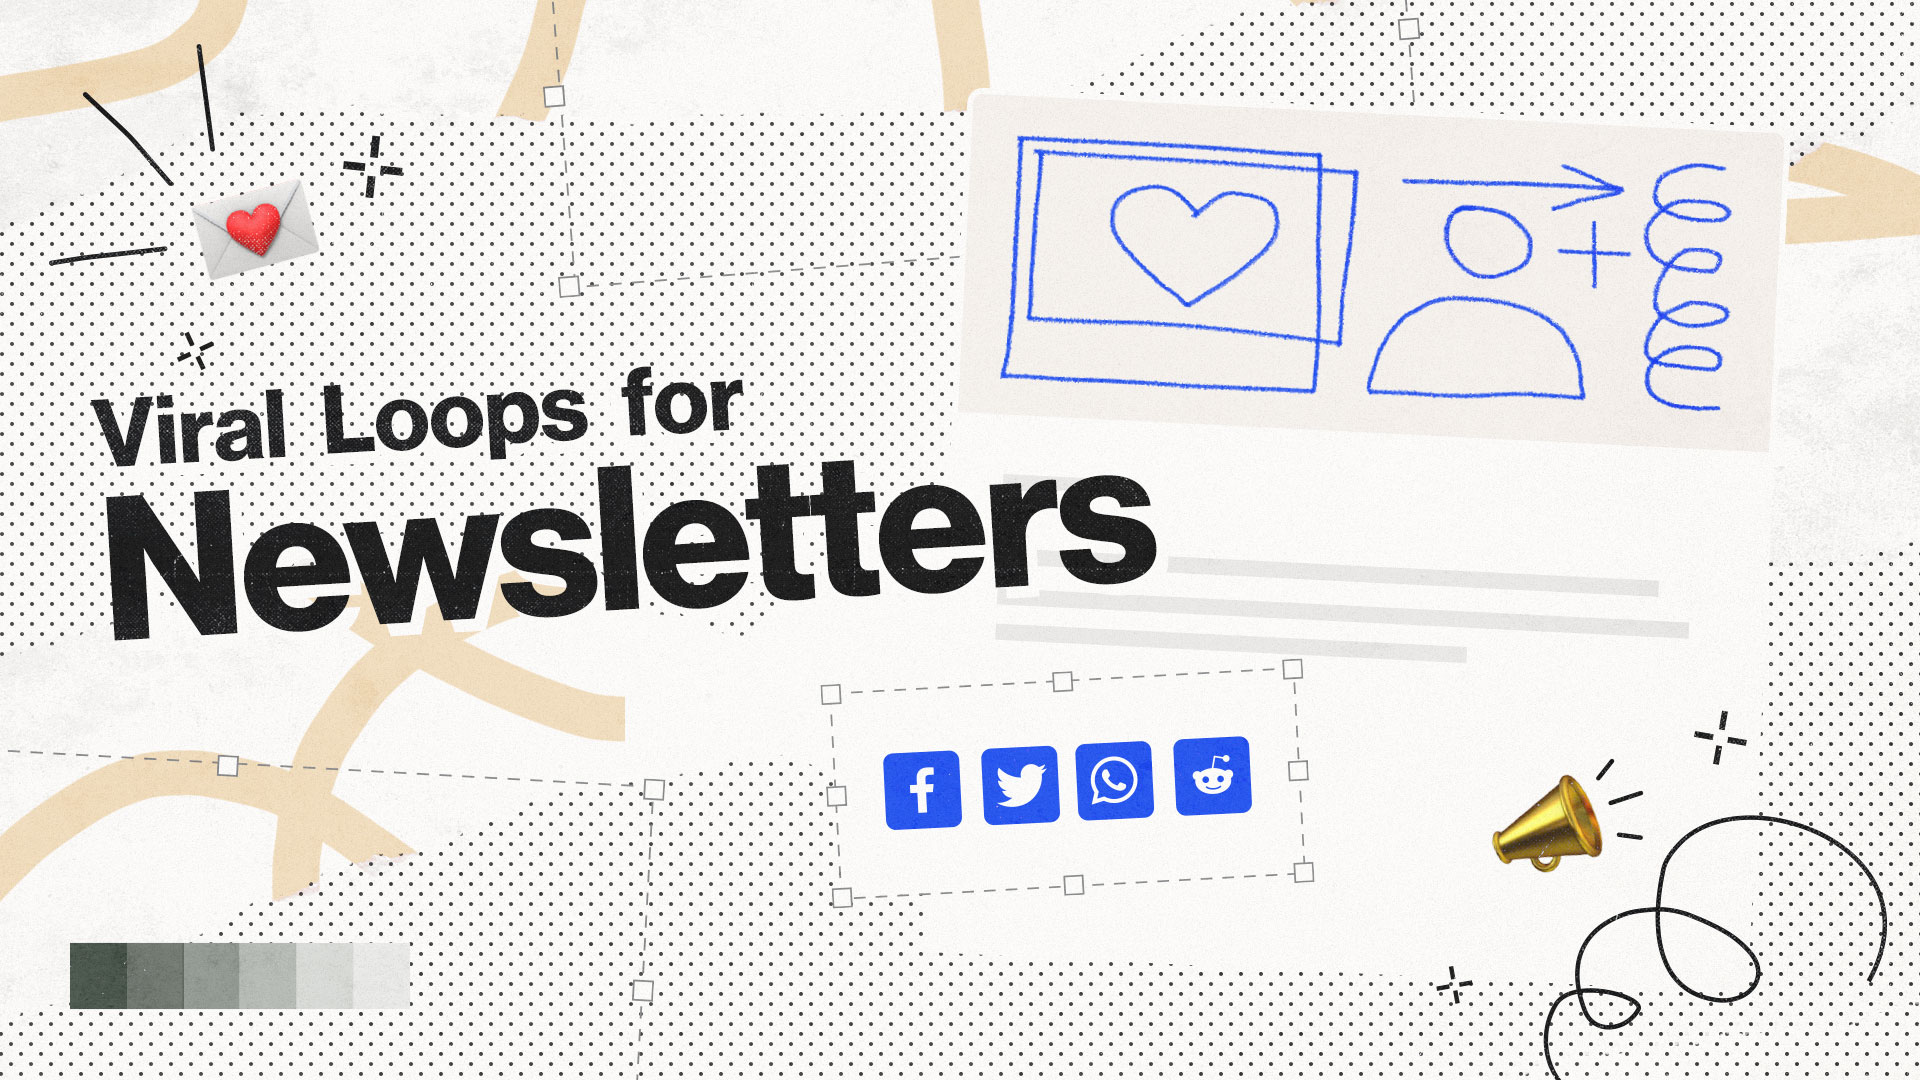 Viral Loops for Newsletters announcement